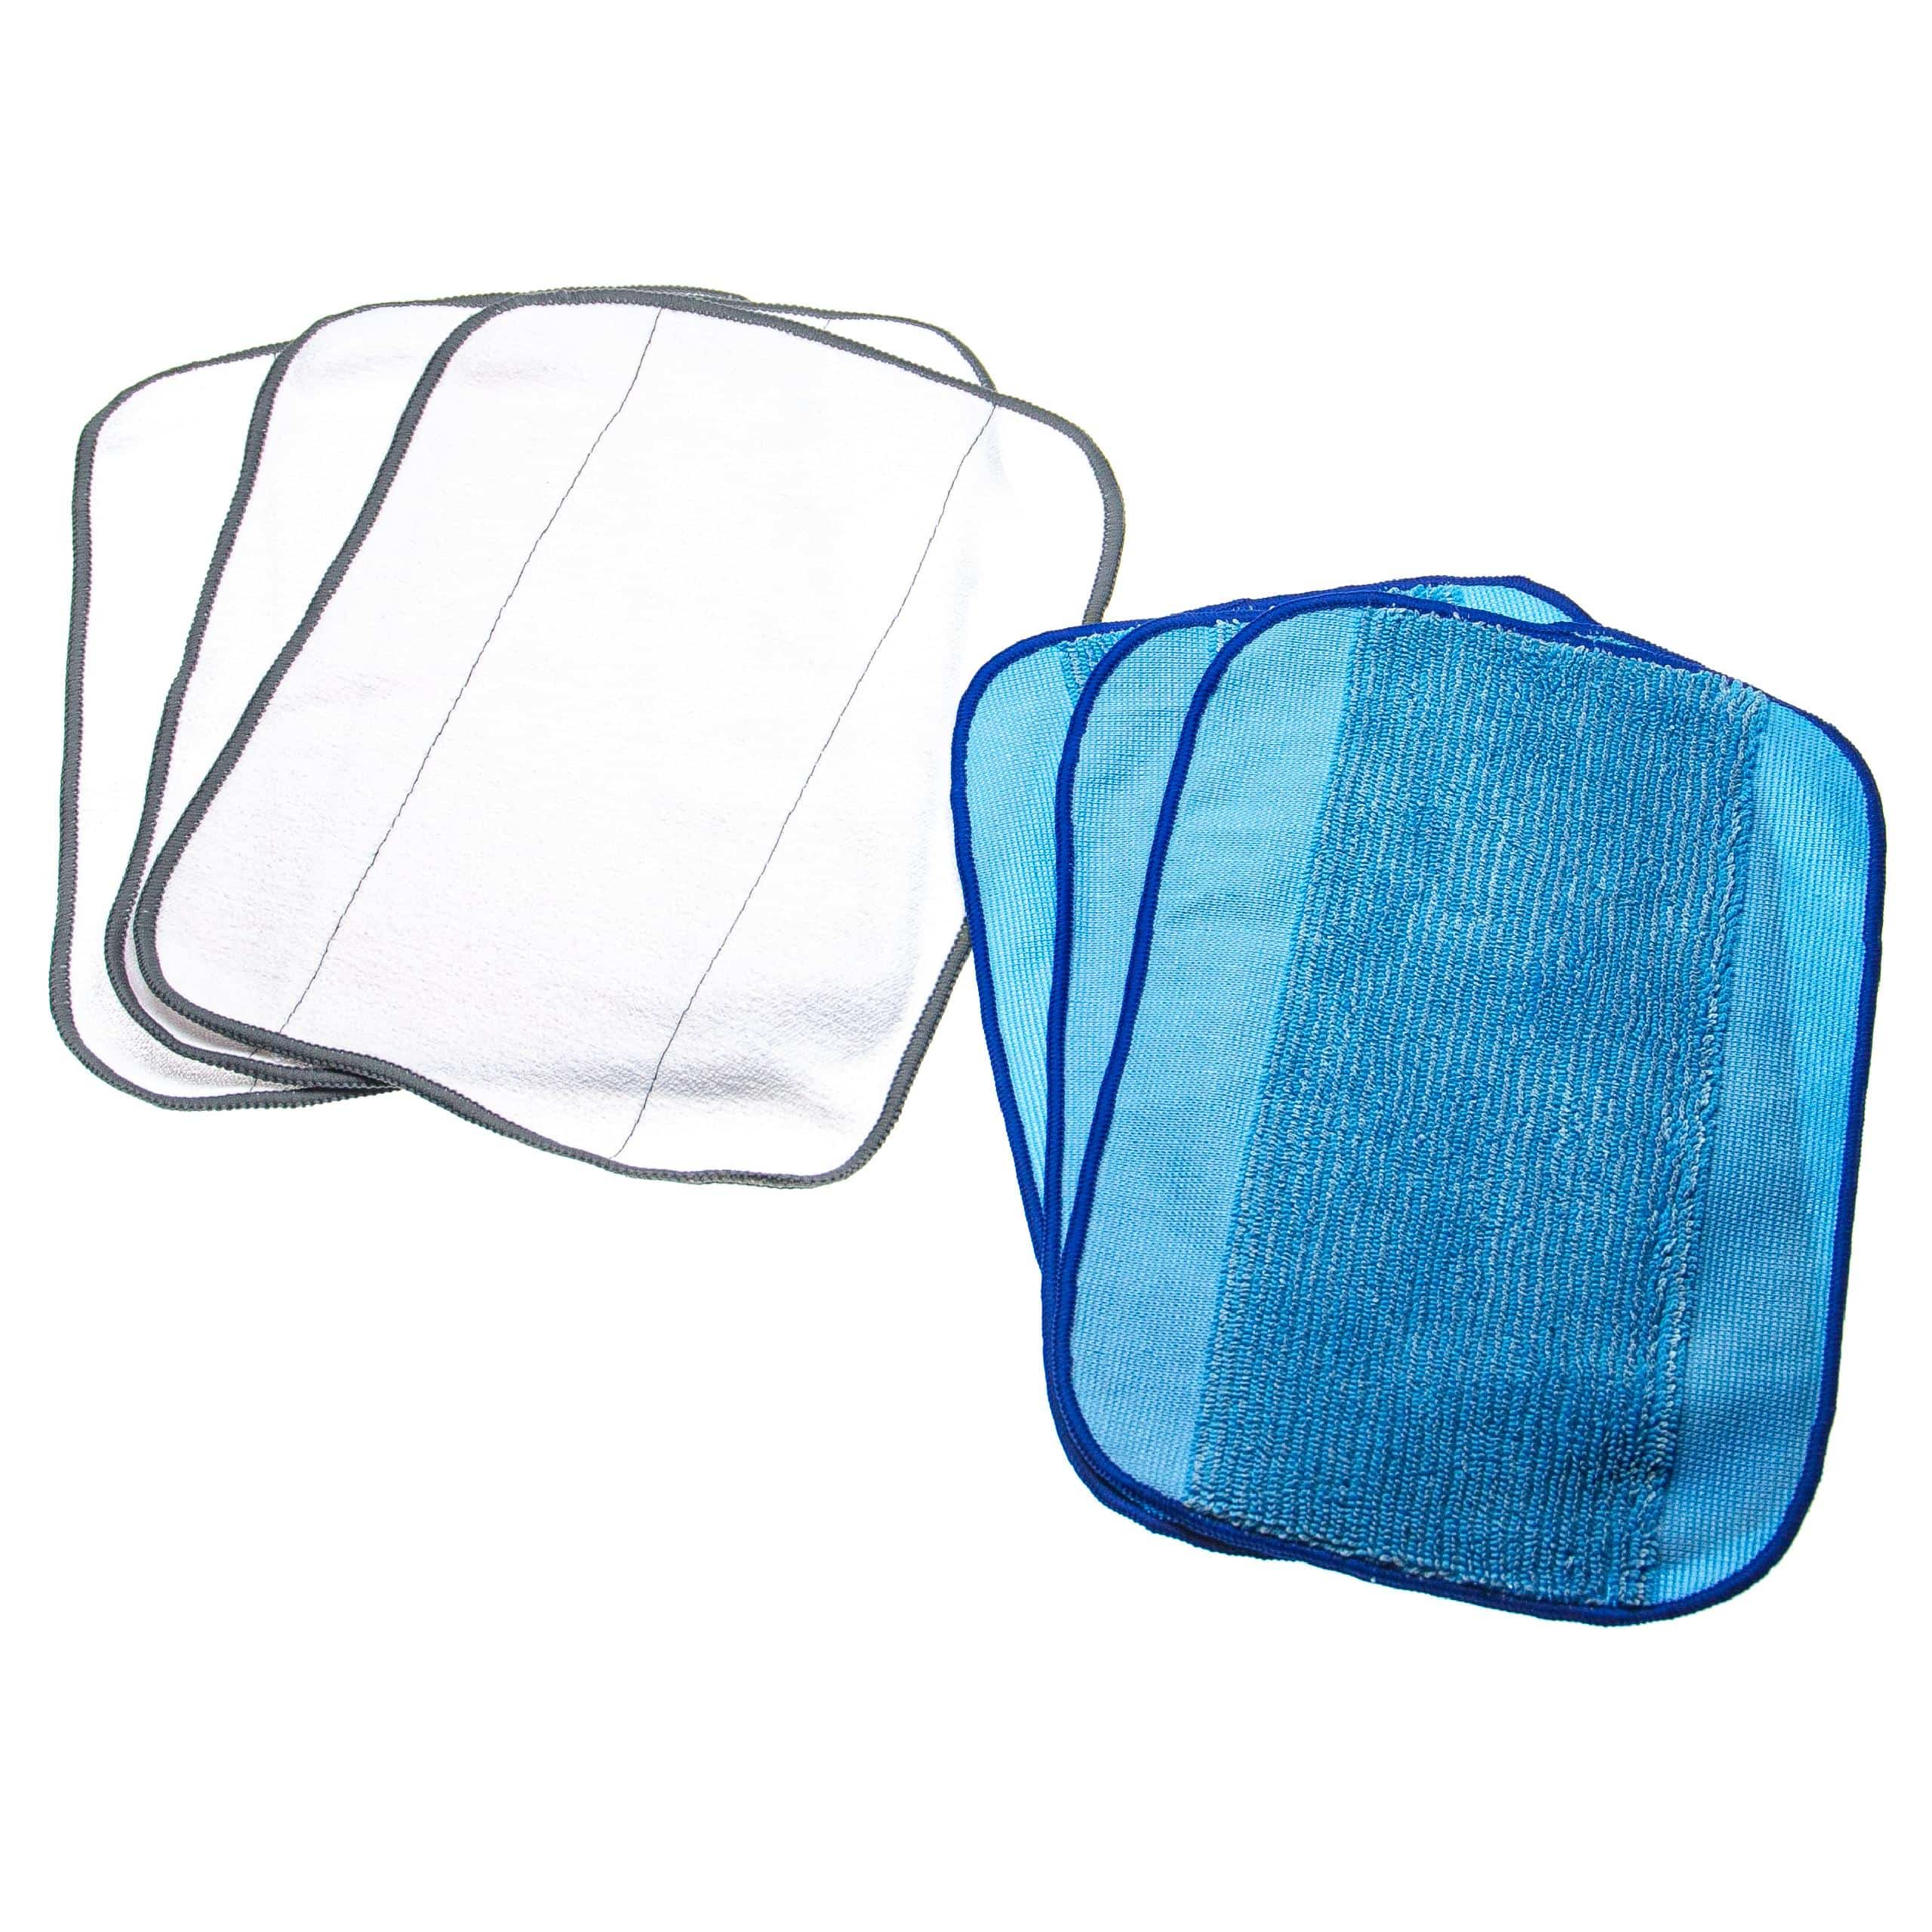  Cleaning Cloth Set (6 Part) replaces iRobot 4409706 for Robot Vacuum - microfleece